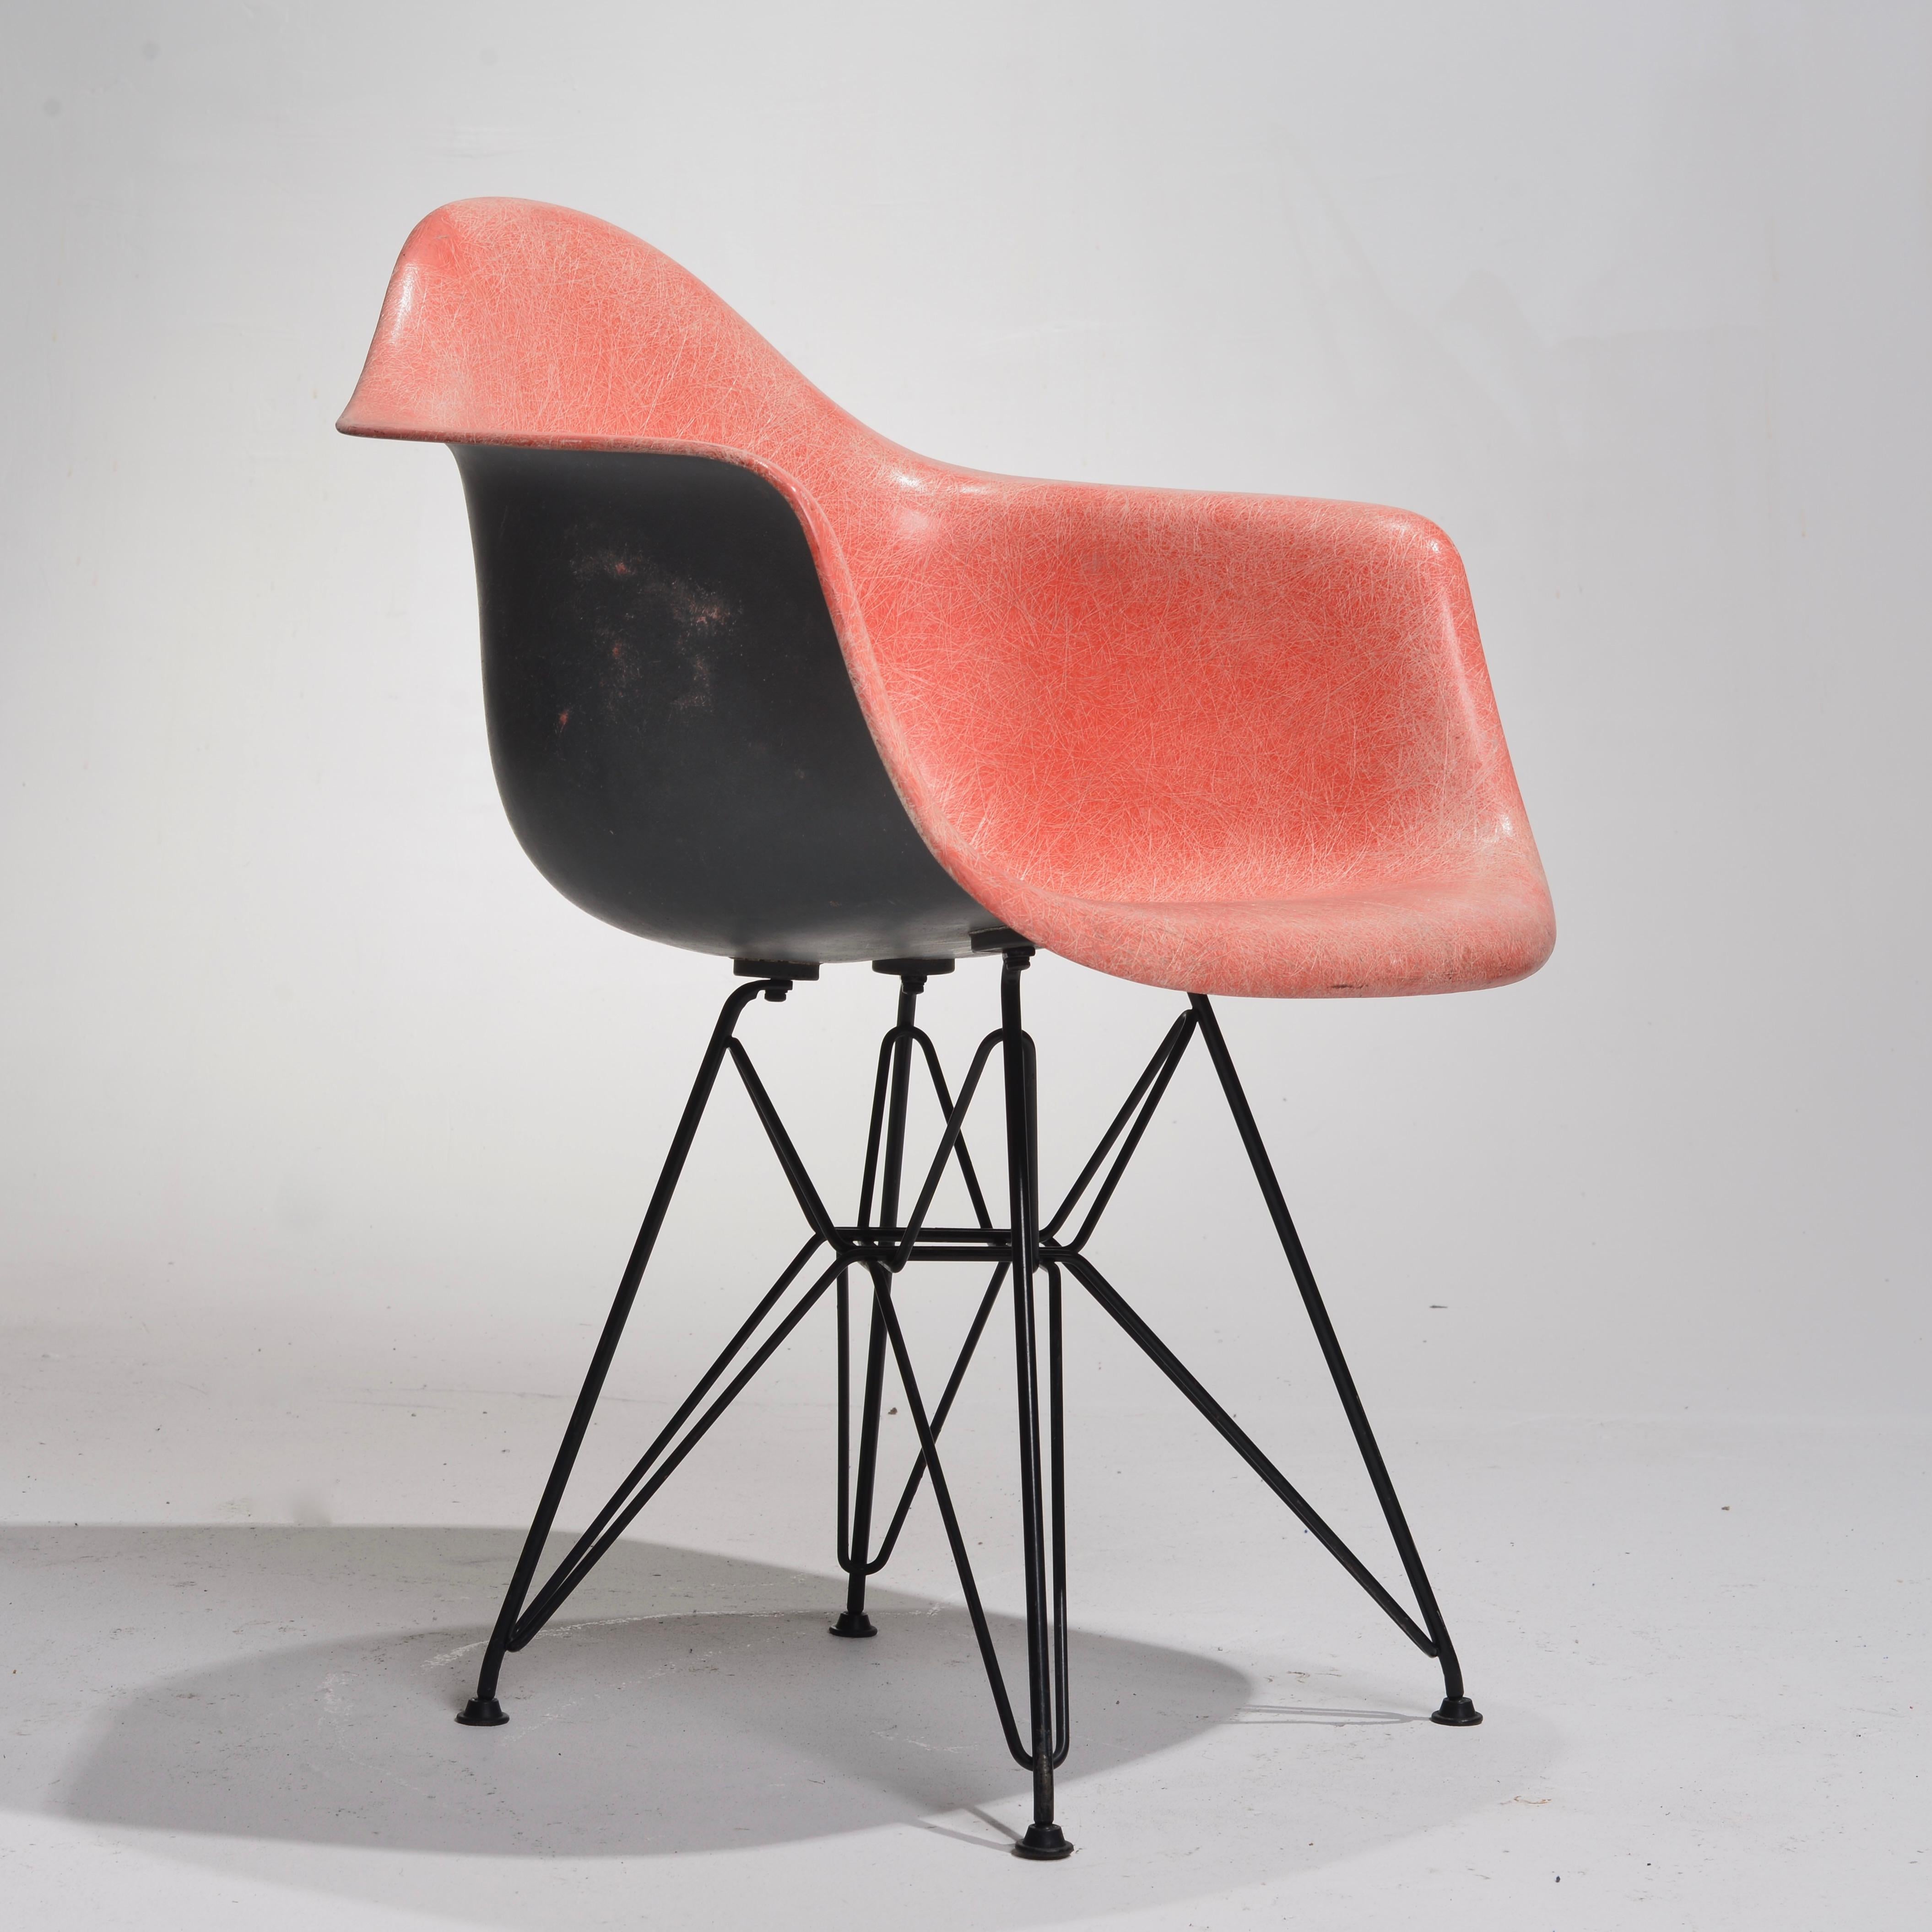 Zenith Charles Eames DAR Fiberglass Shell Chairs For Sale 7